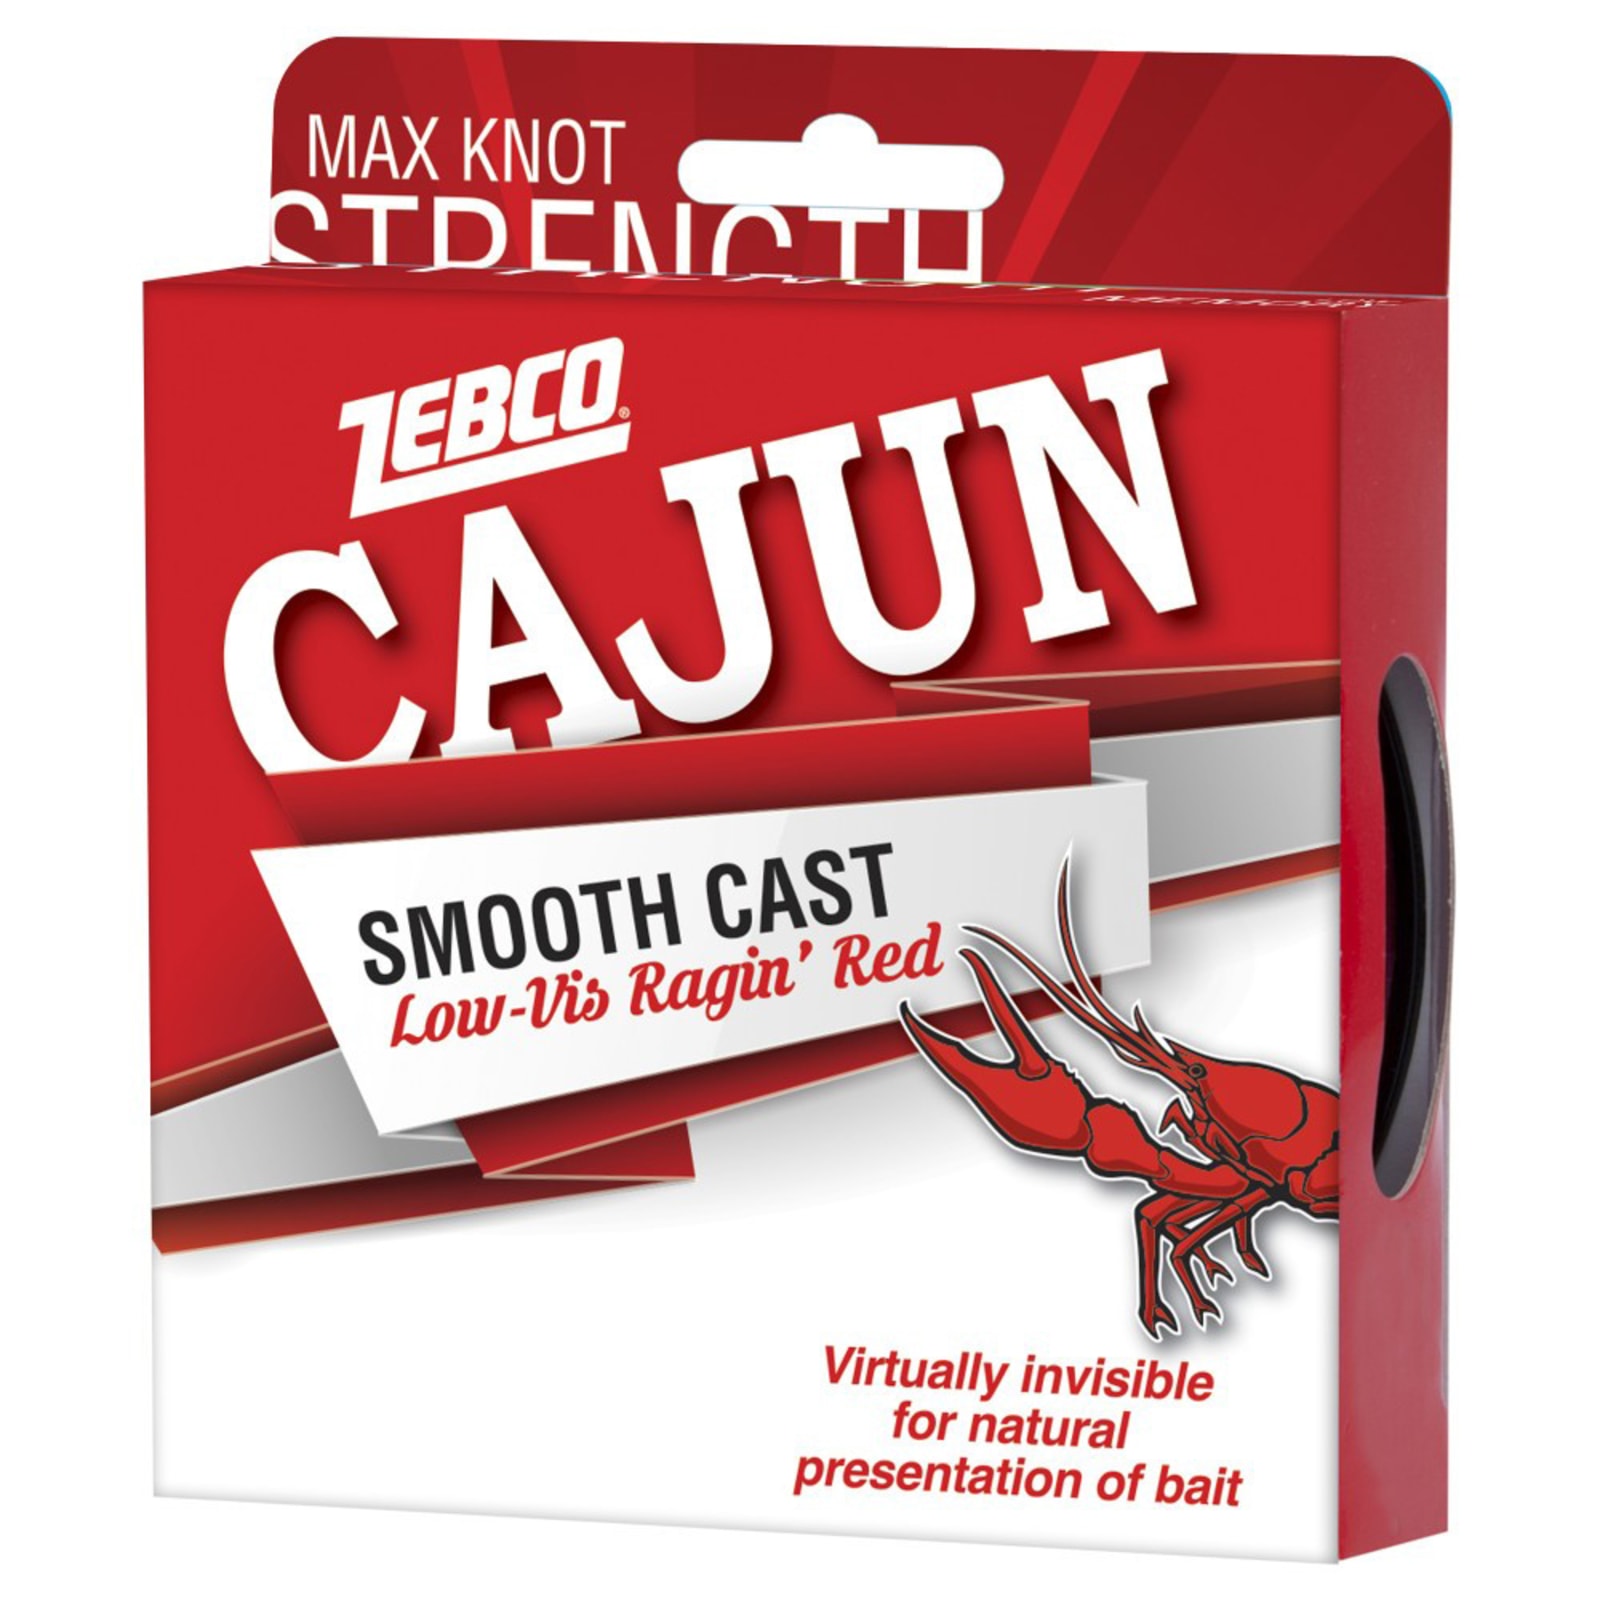 Cajun Max Knot Strength Smooth Cast Low-Vis Line by Zebco at Fleet Farm